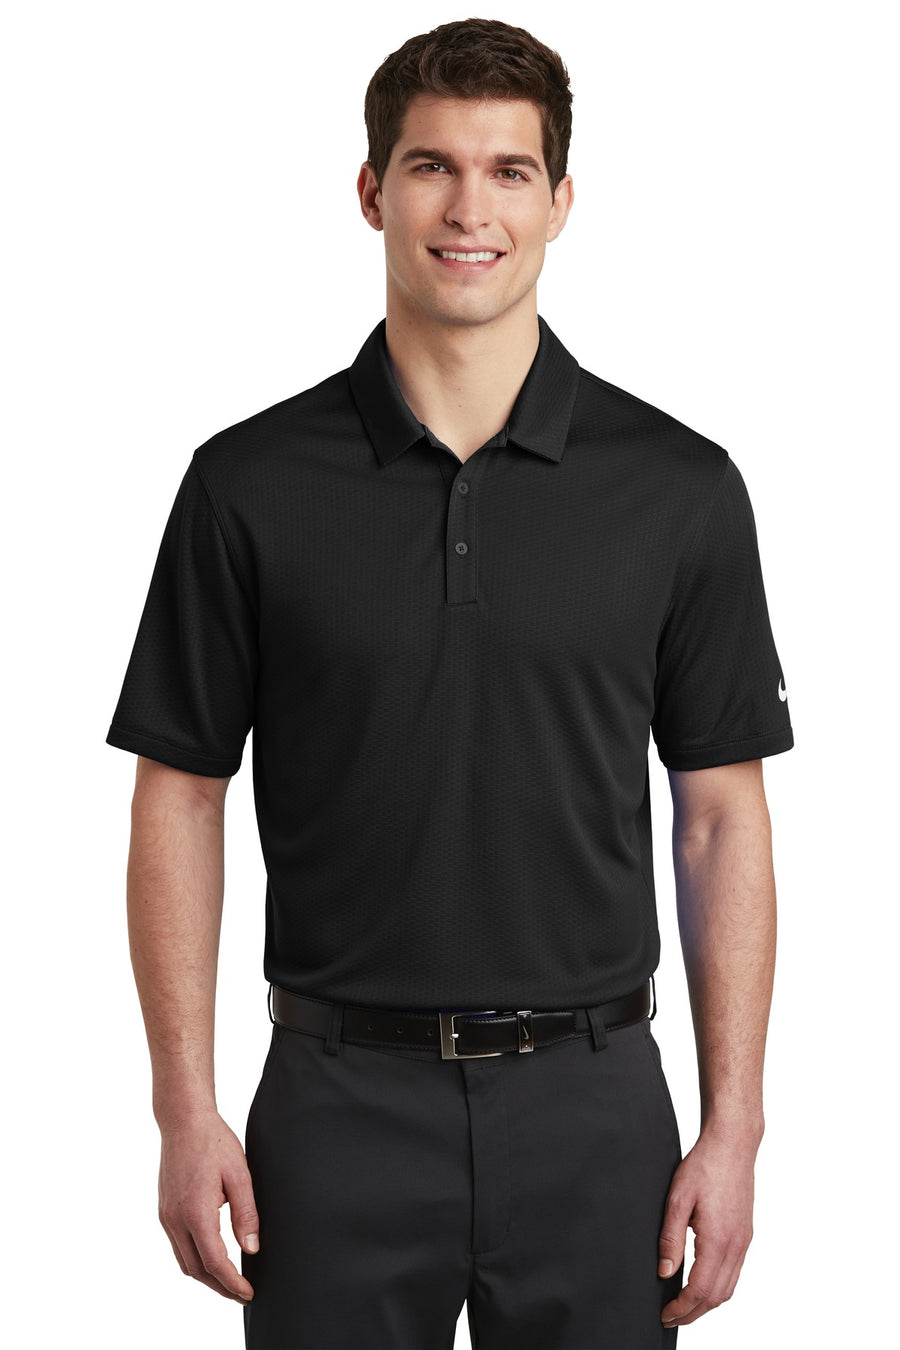 Nike Dri-FIT Hex Textured Polo.